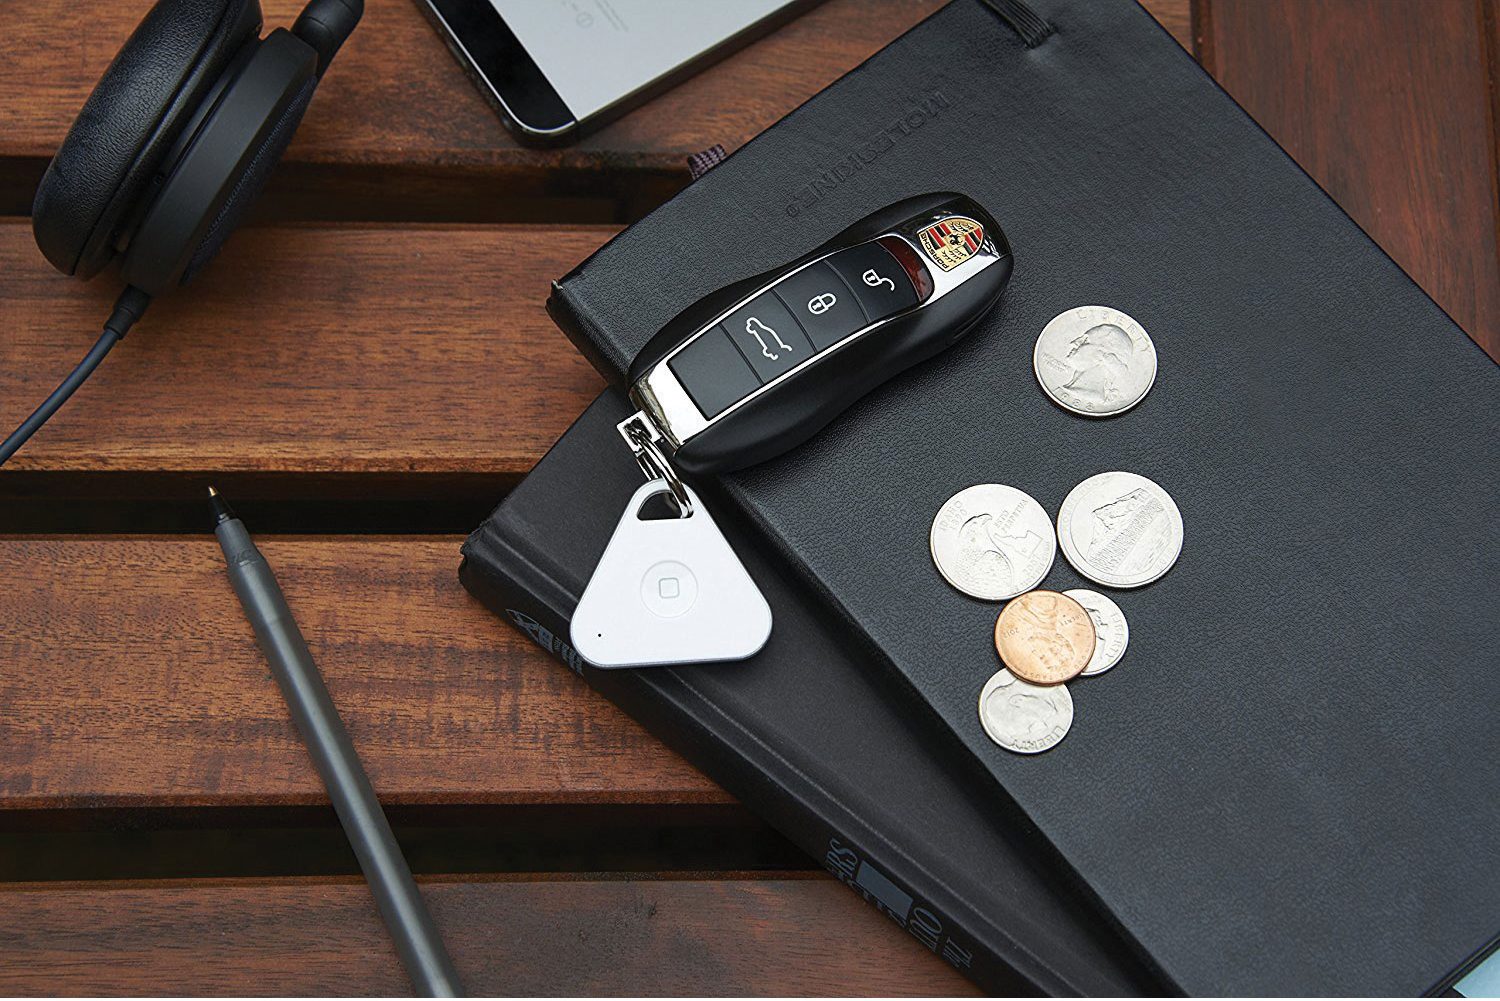 A photo of the iHere key finder attached to a car key